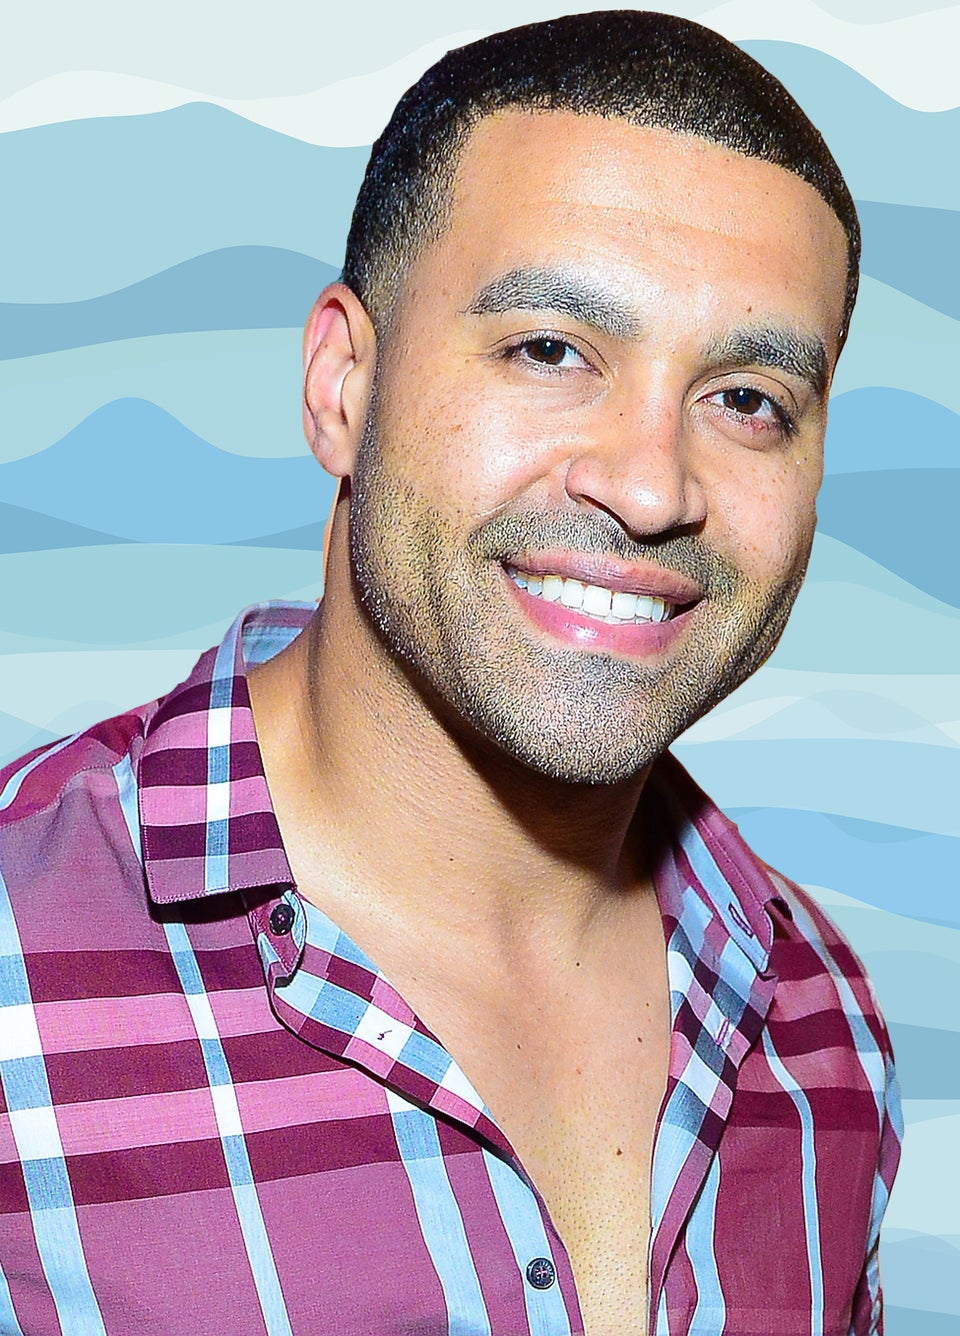 ‘Real Housewives of Atlanta’s’ Apollo Nida Released From Prison